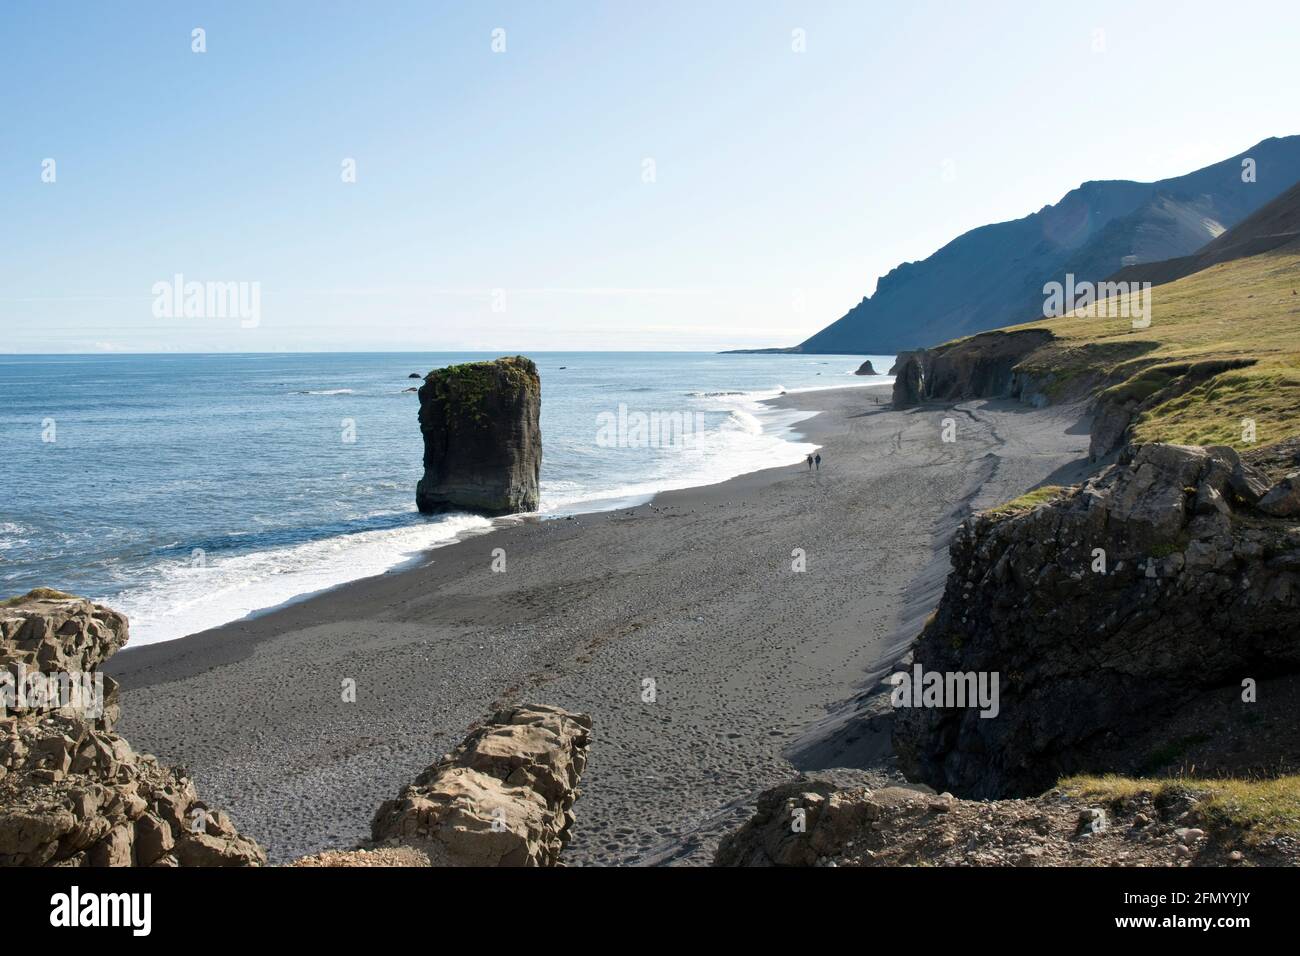 People walk on the black sand beach, along the cliffs and rock formations at Fauskasandur in east Iceland. Stock Photo